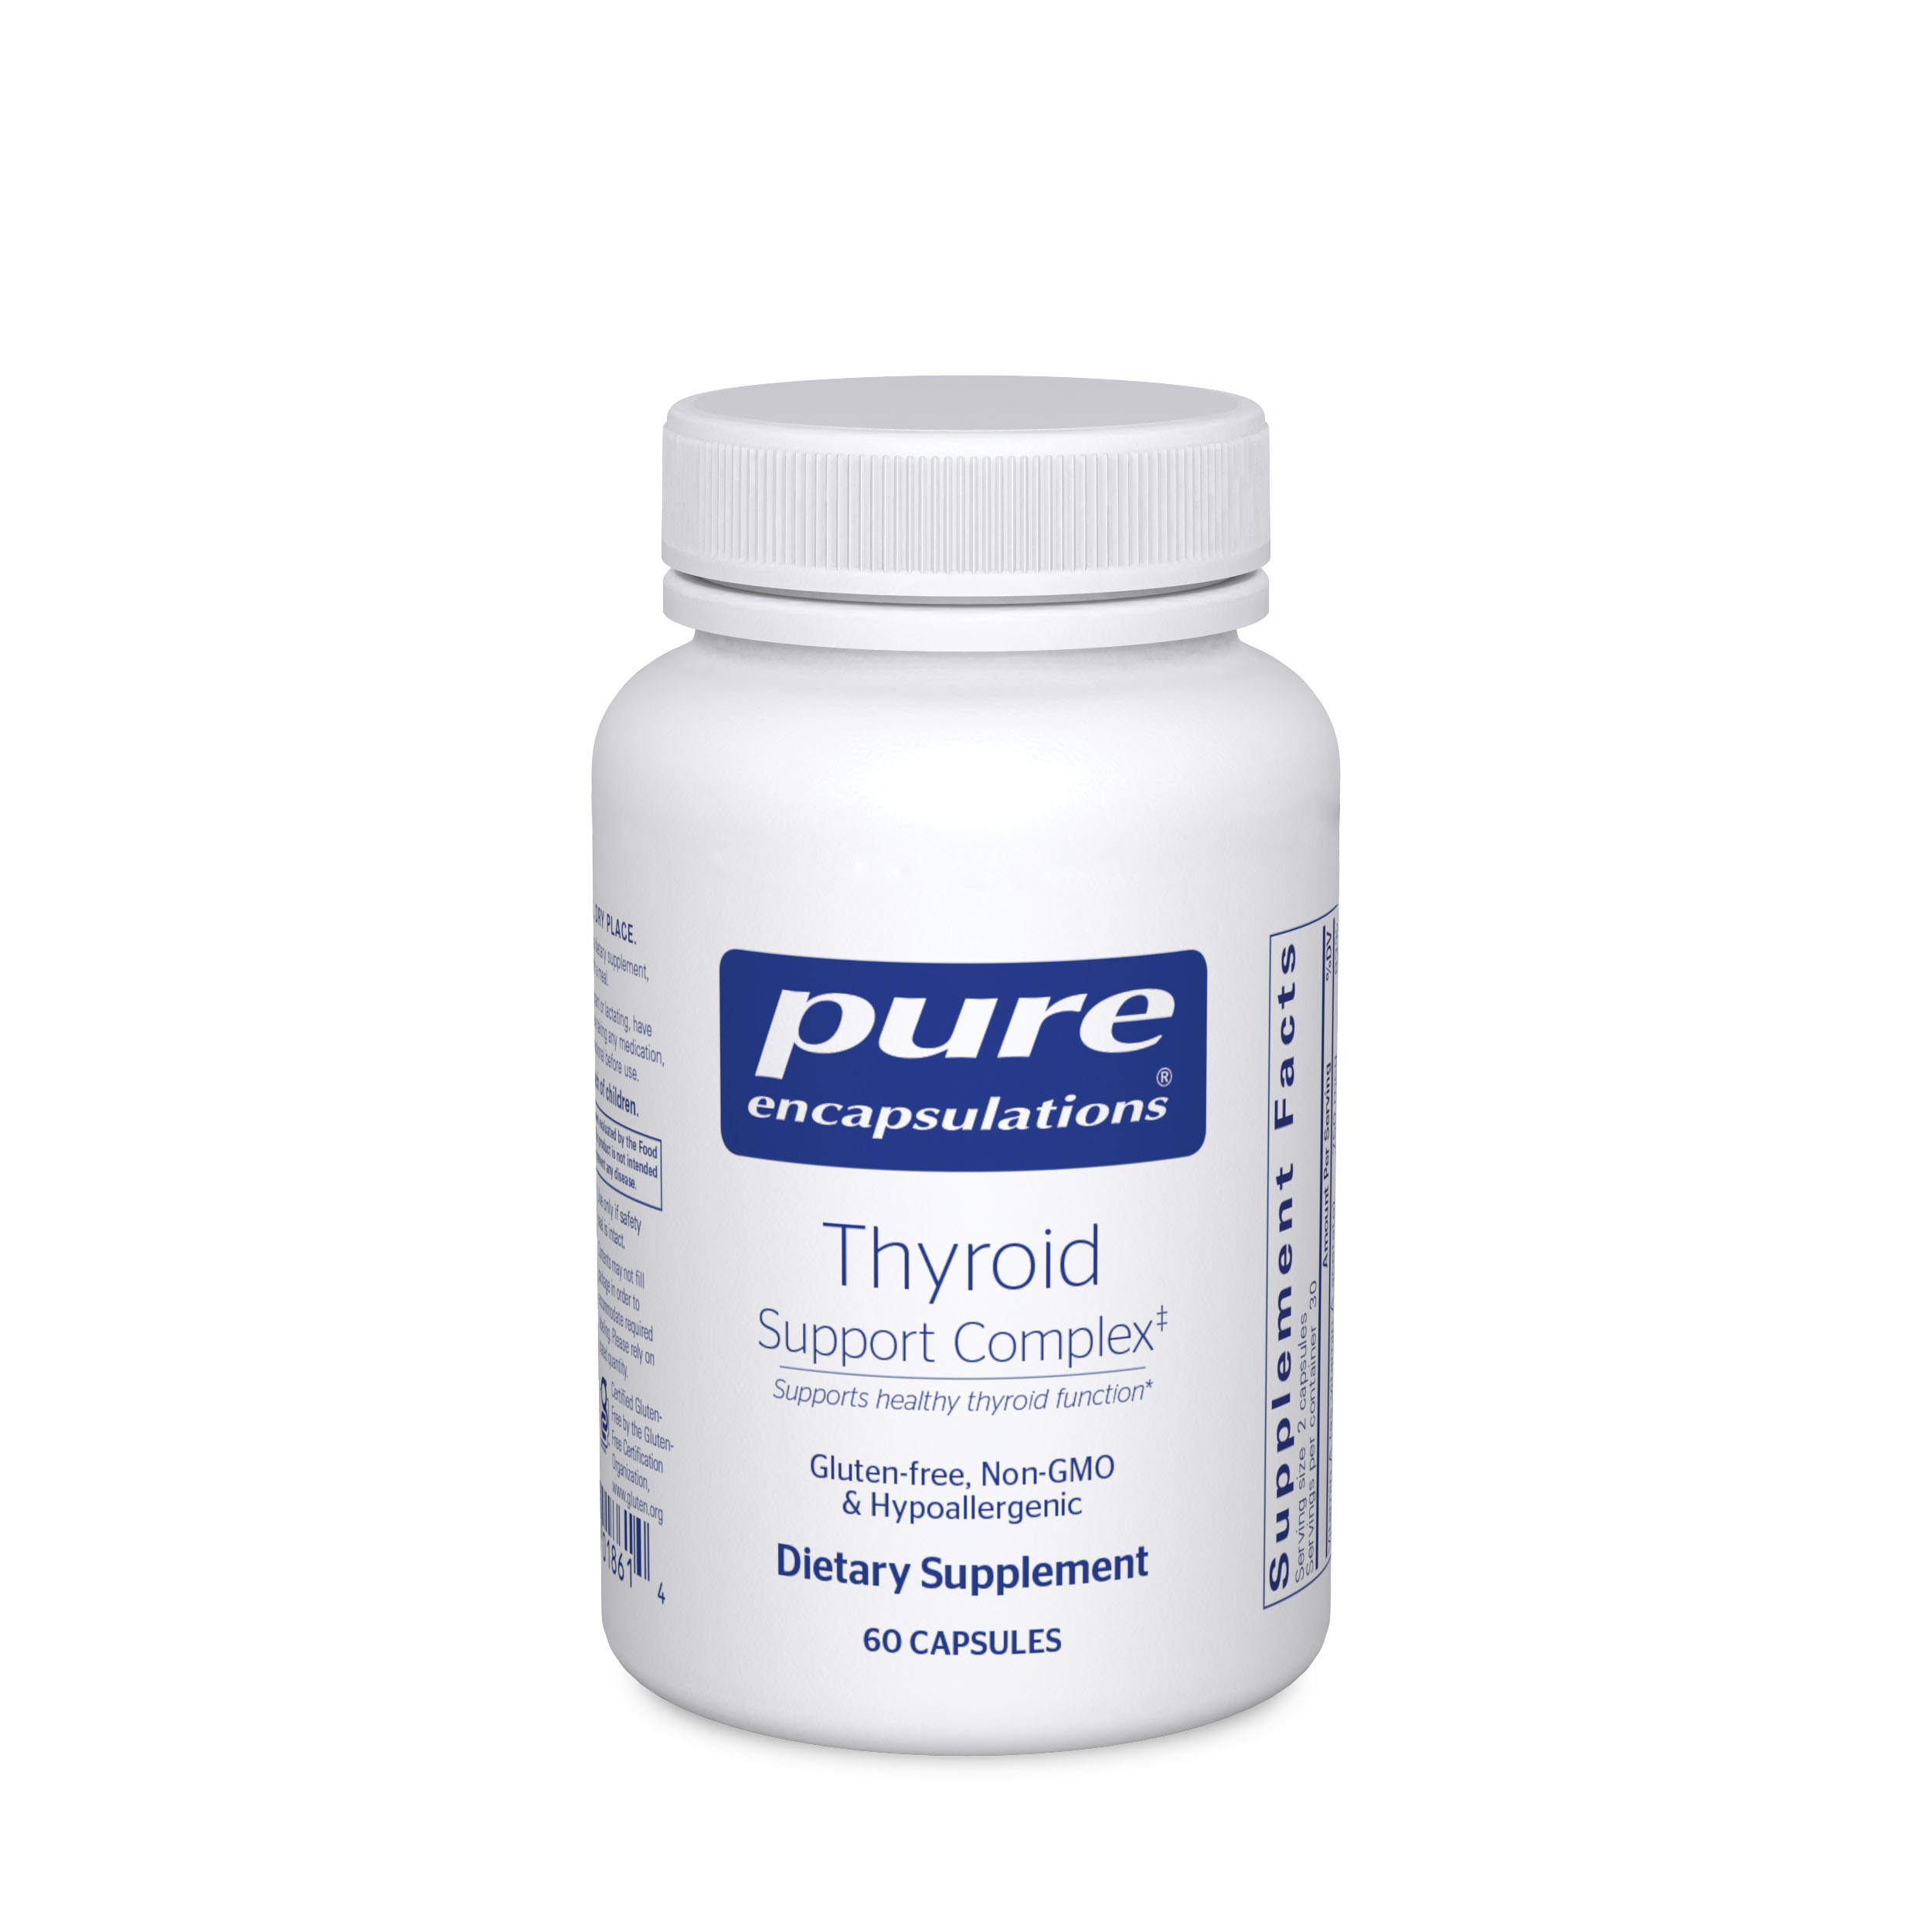 Pure Encapsulations Thyroid Support Complex Bottle, 60 capsules